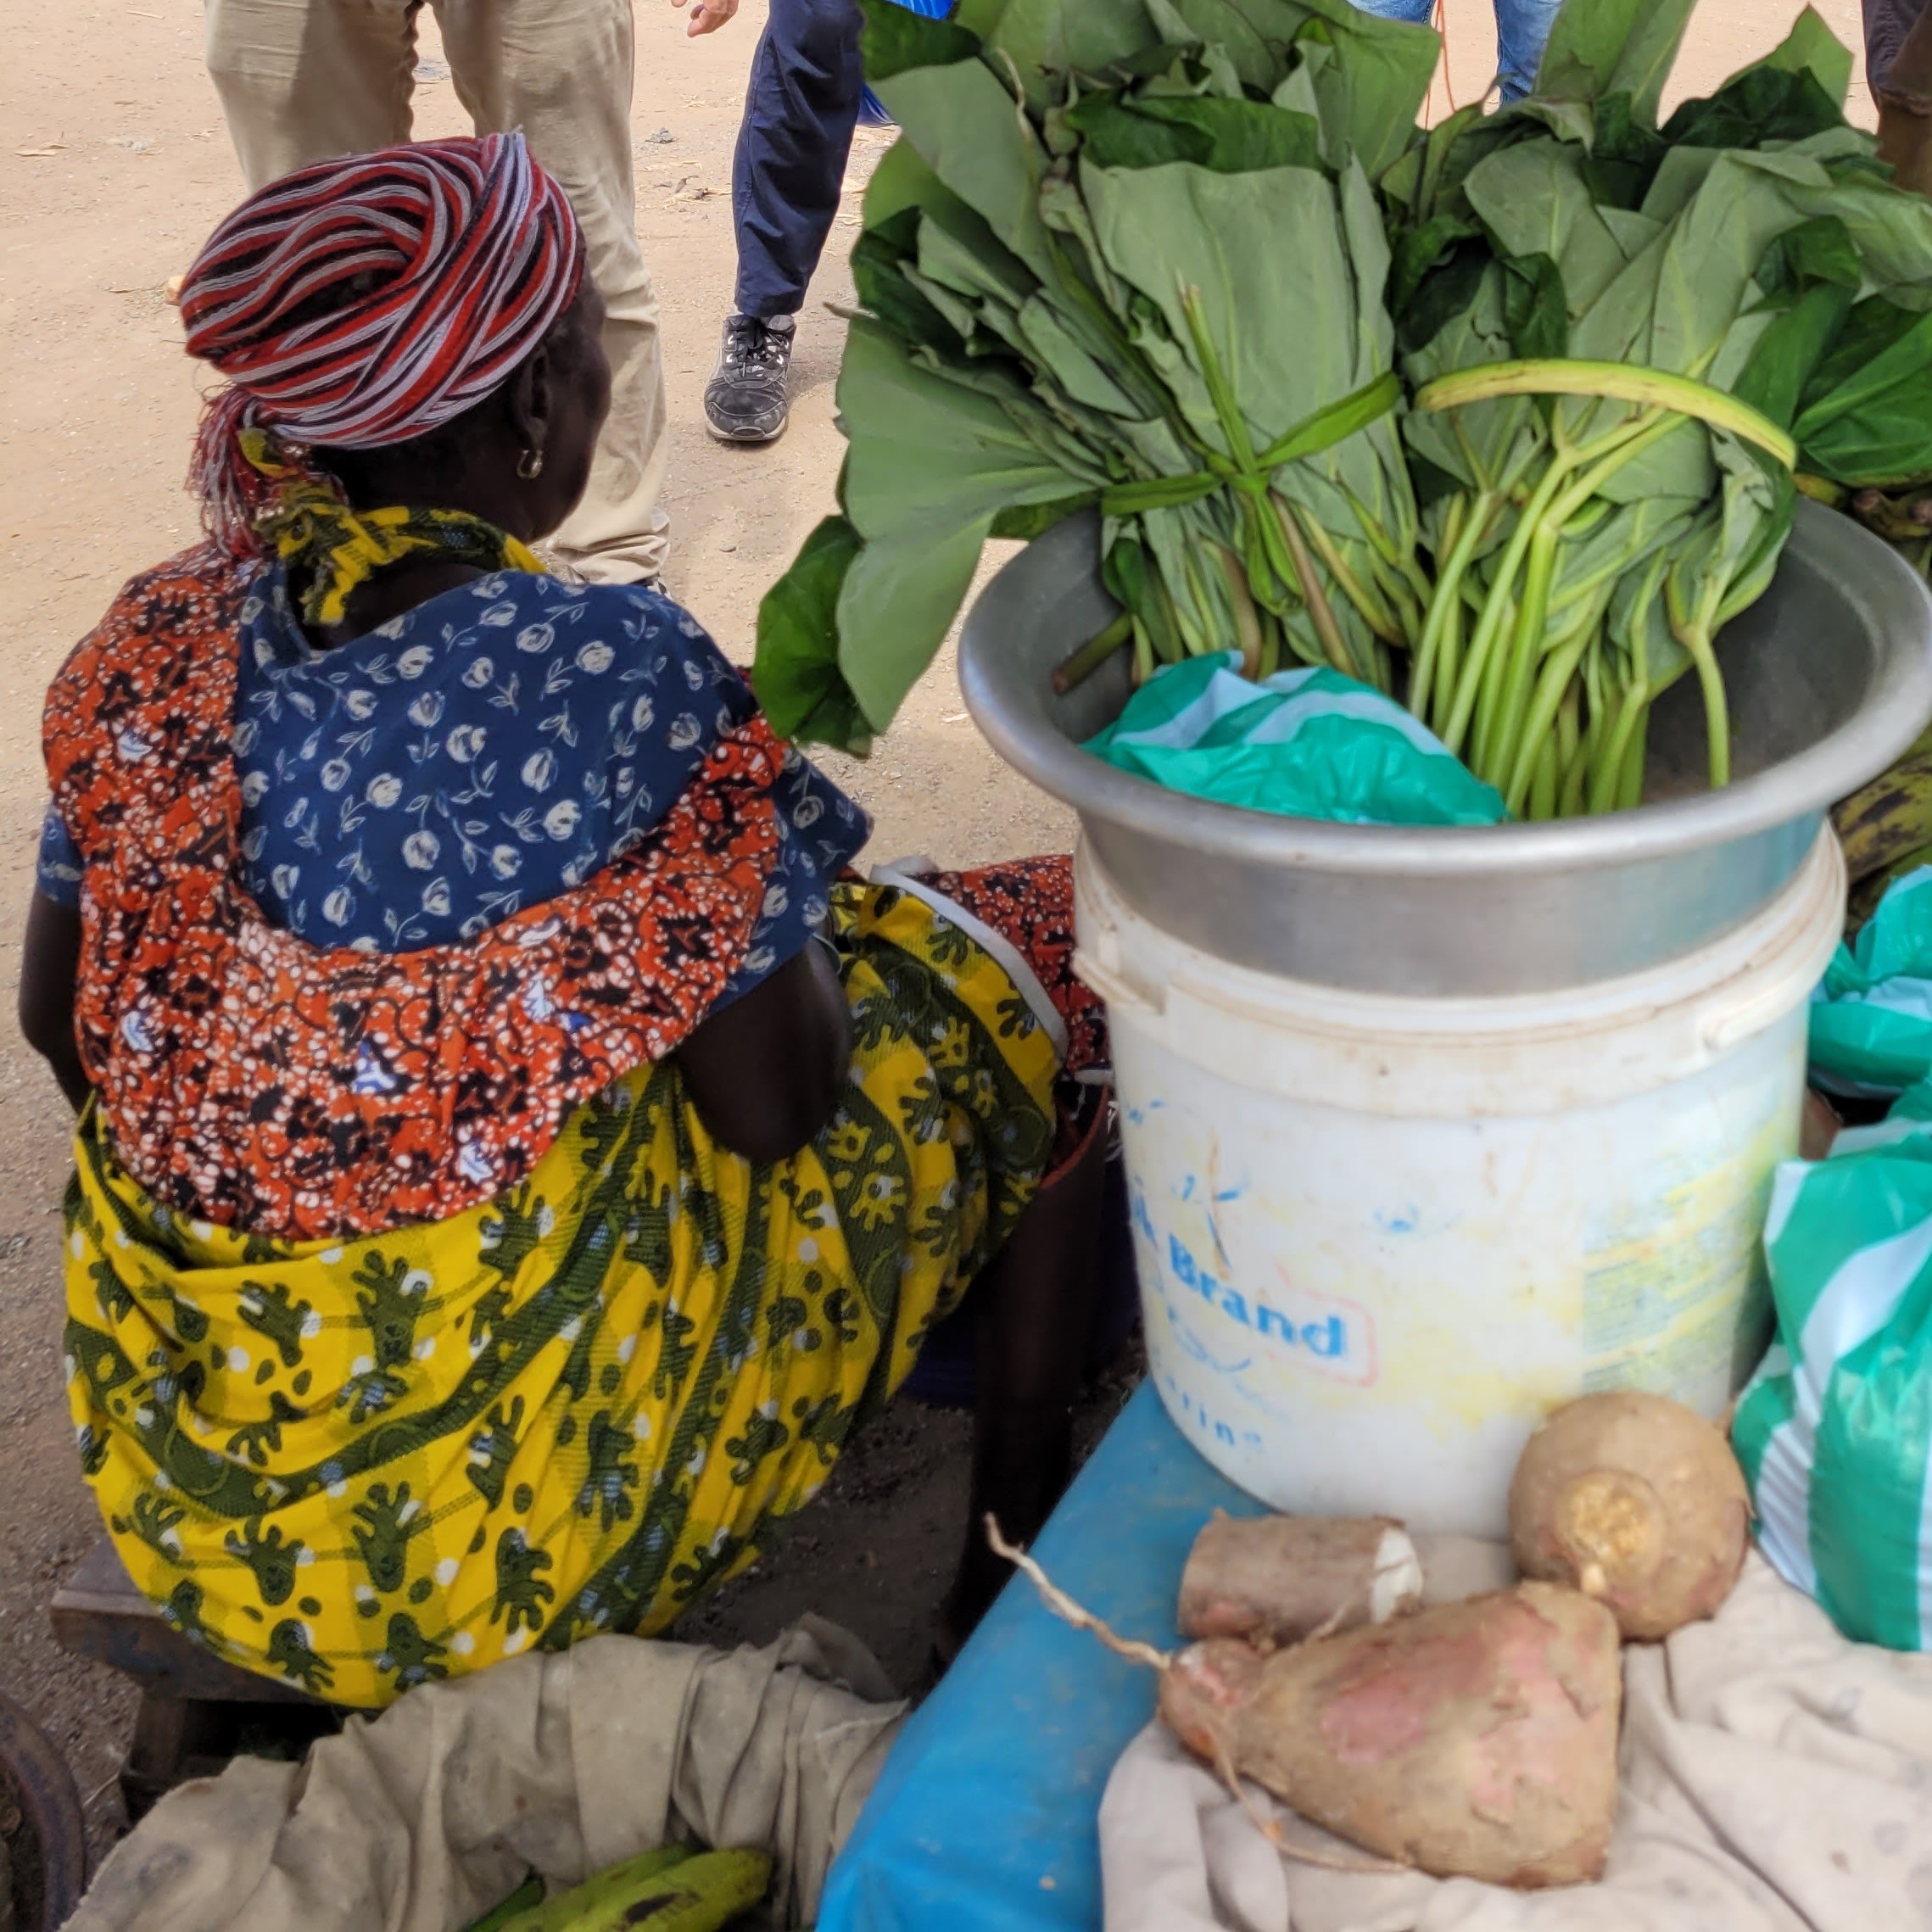 A woman selling greens at a market in Ghana.